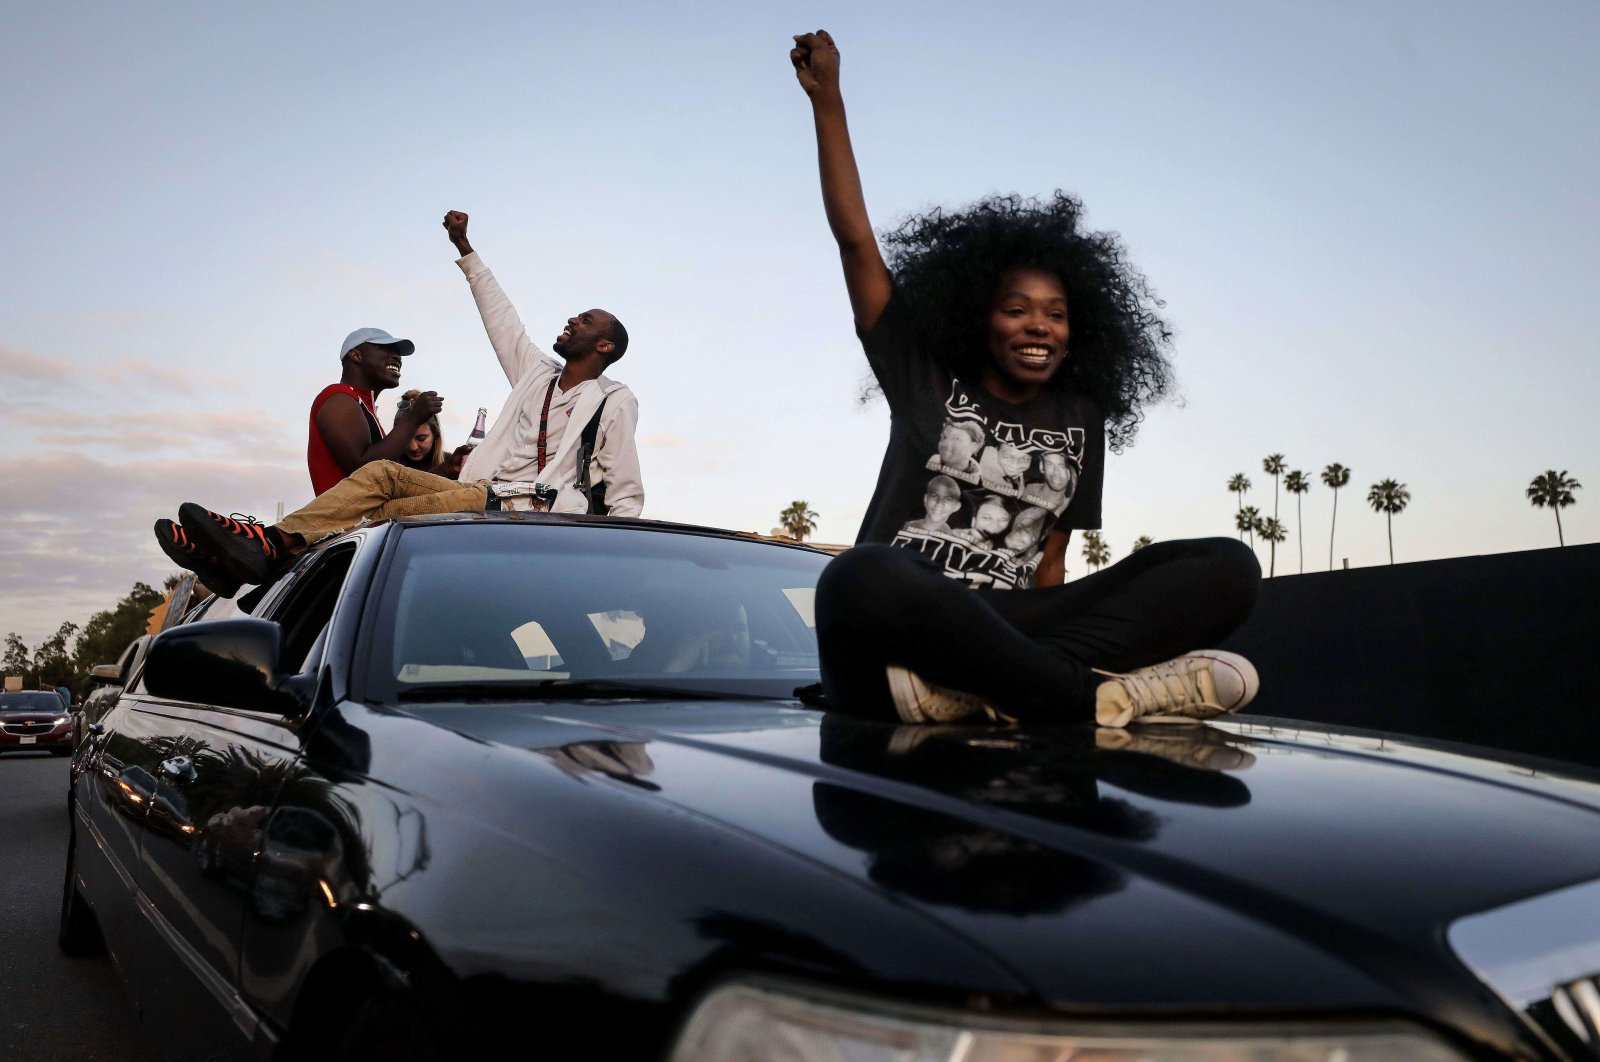 Protesters ride atop a limousine in a march toward Hollywood Boulevard during a peaceful demonstration against racism and police brutality, Los Angeles, California, June 6, 2020. (AFP Photo)